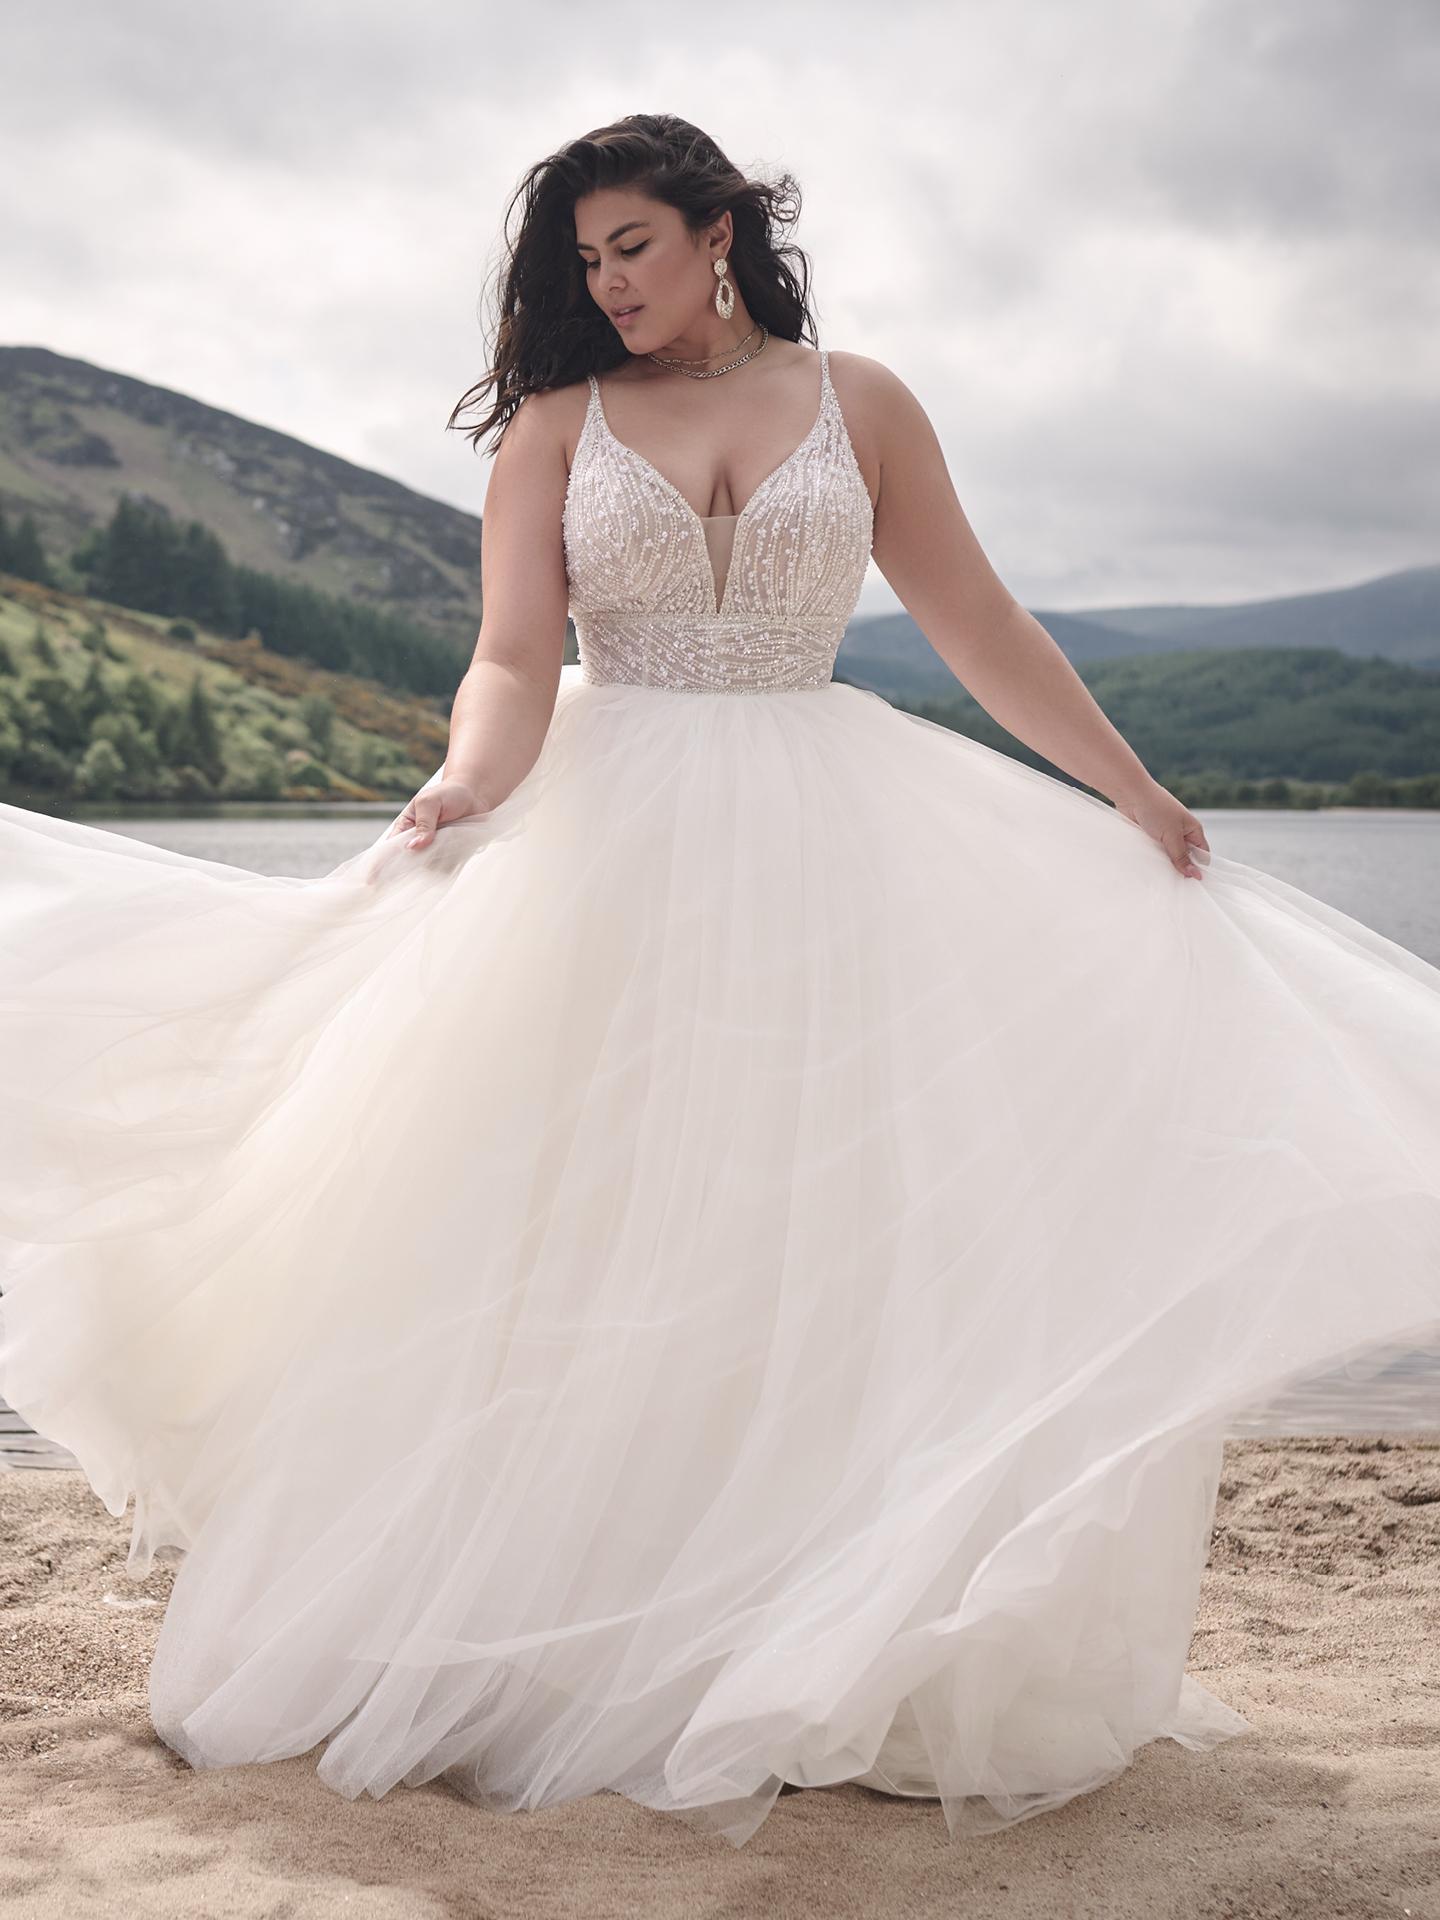 Explore The World Of Maggie Sottero And Find The Perfect Gown For YOU